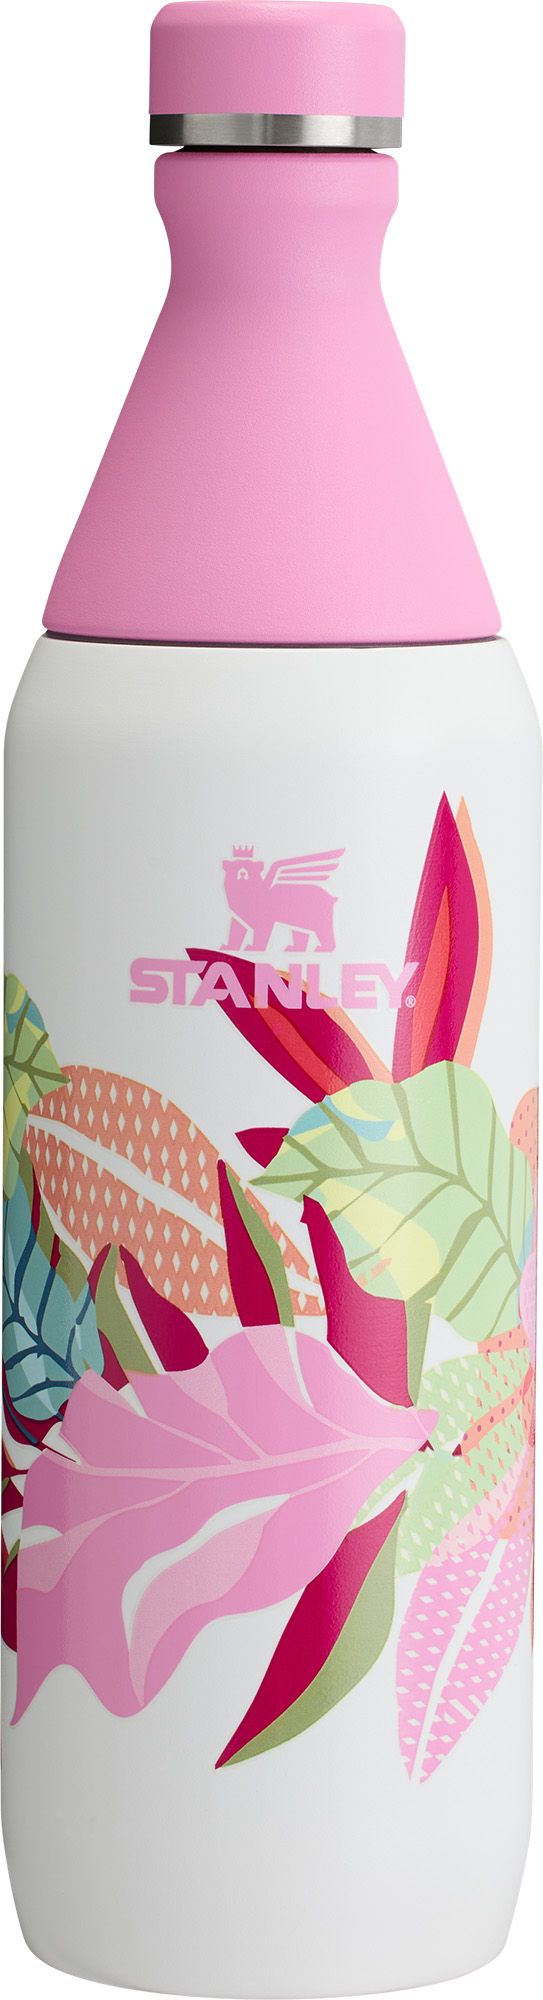 Stanley The Mother's Day All Day Slim 20oz Bottle Sorbet Tropic